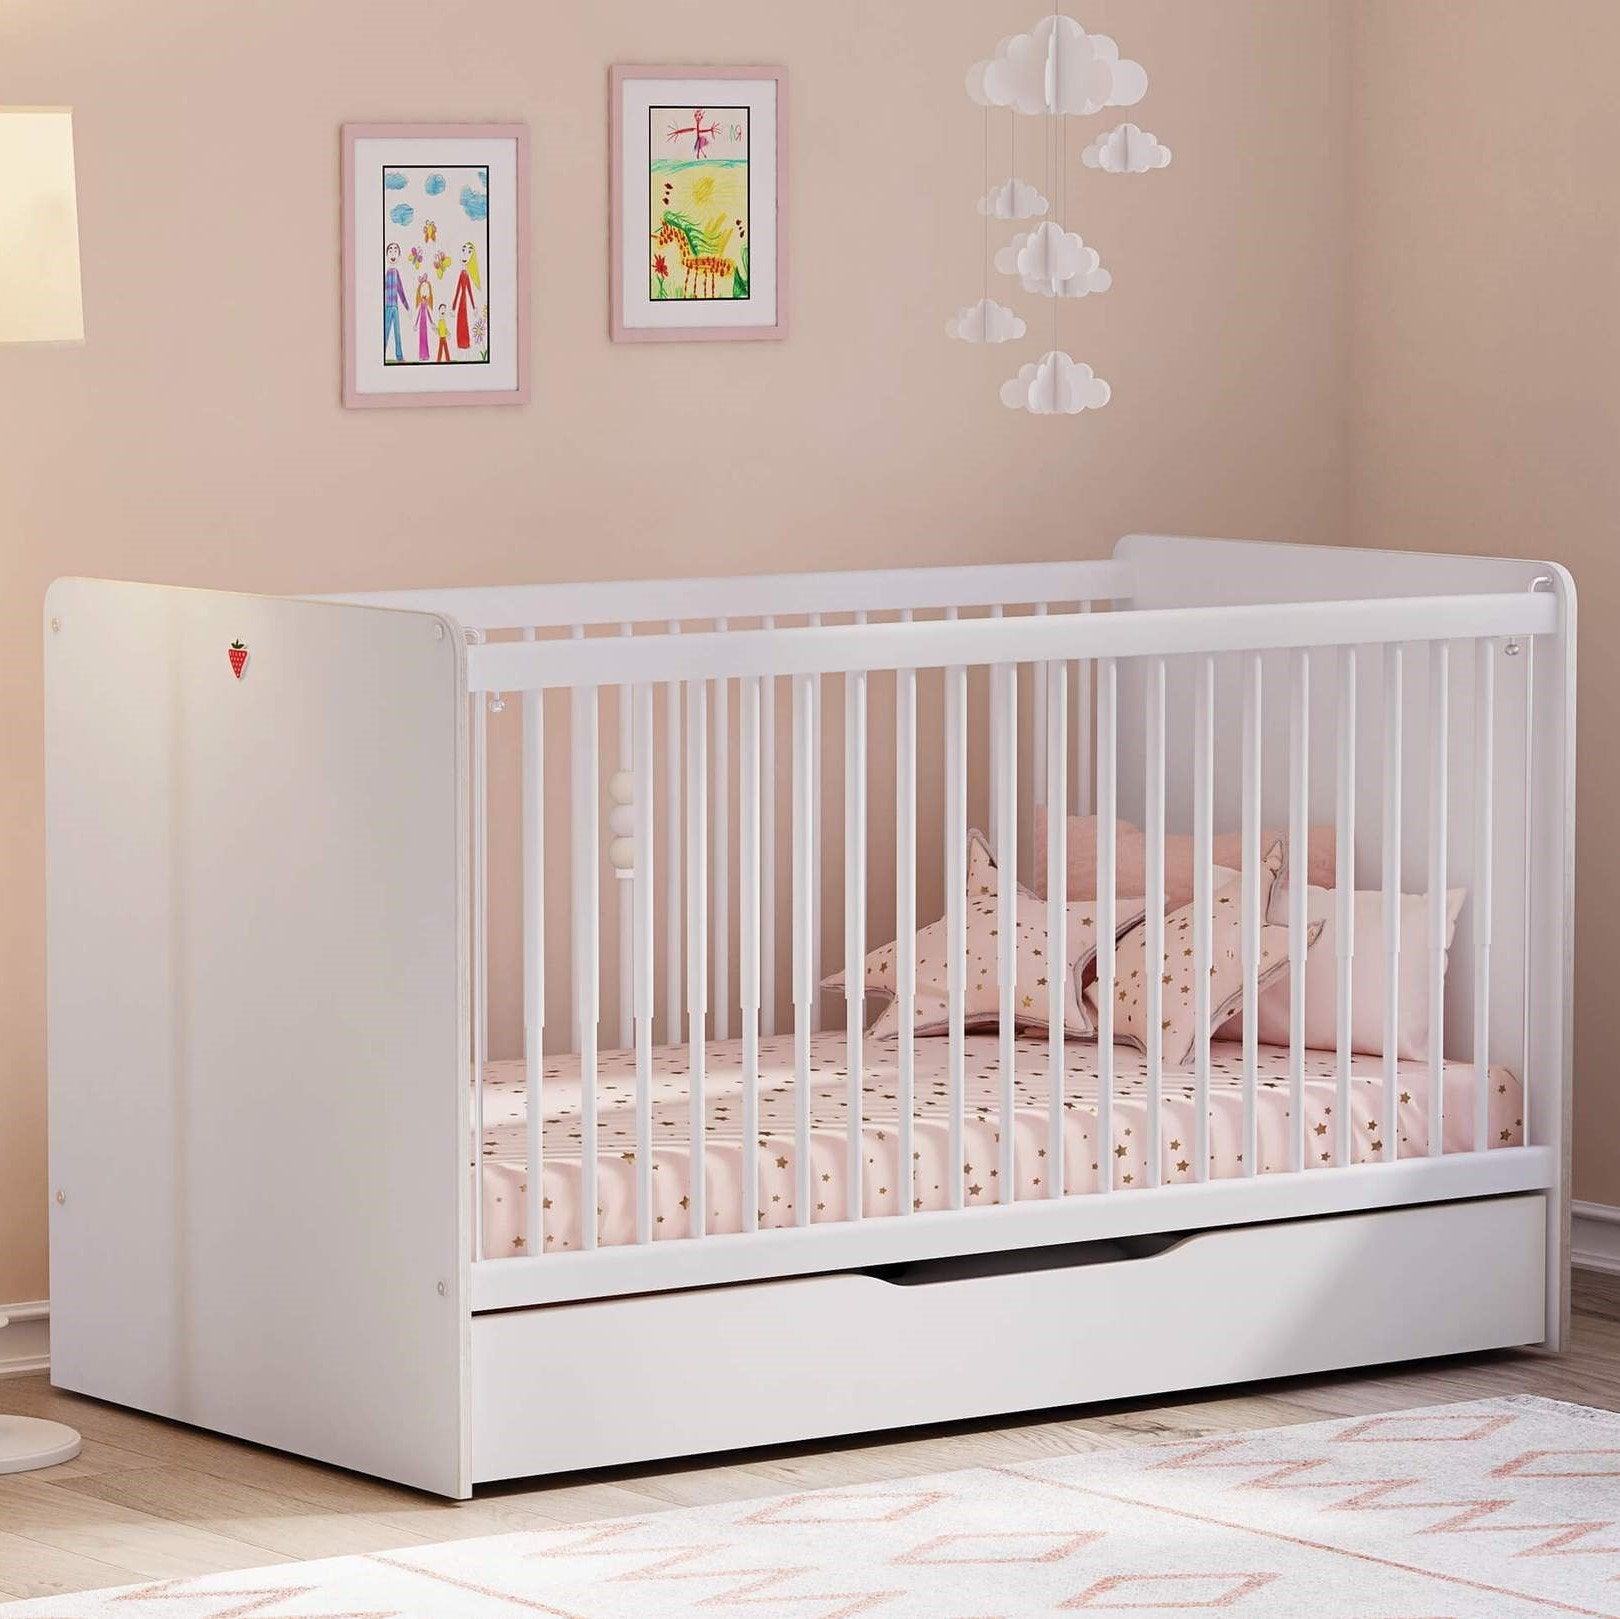 Cilek Montes White Lift Baby Bed